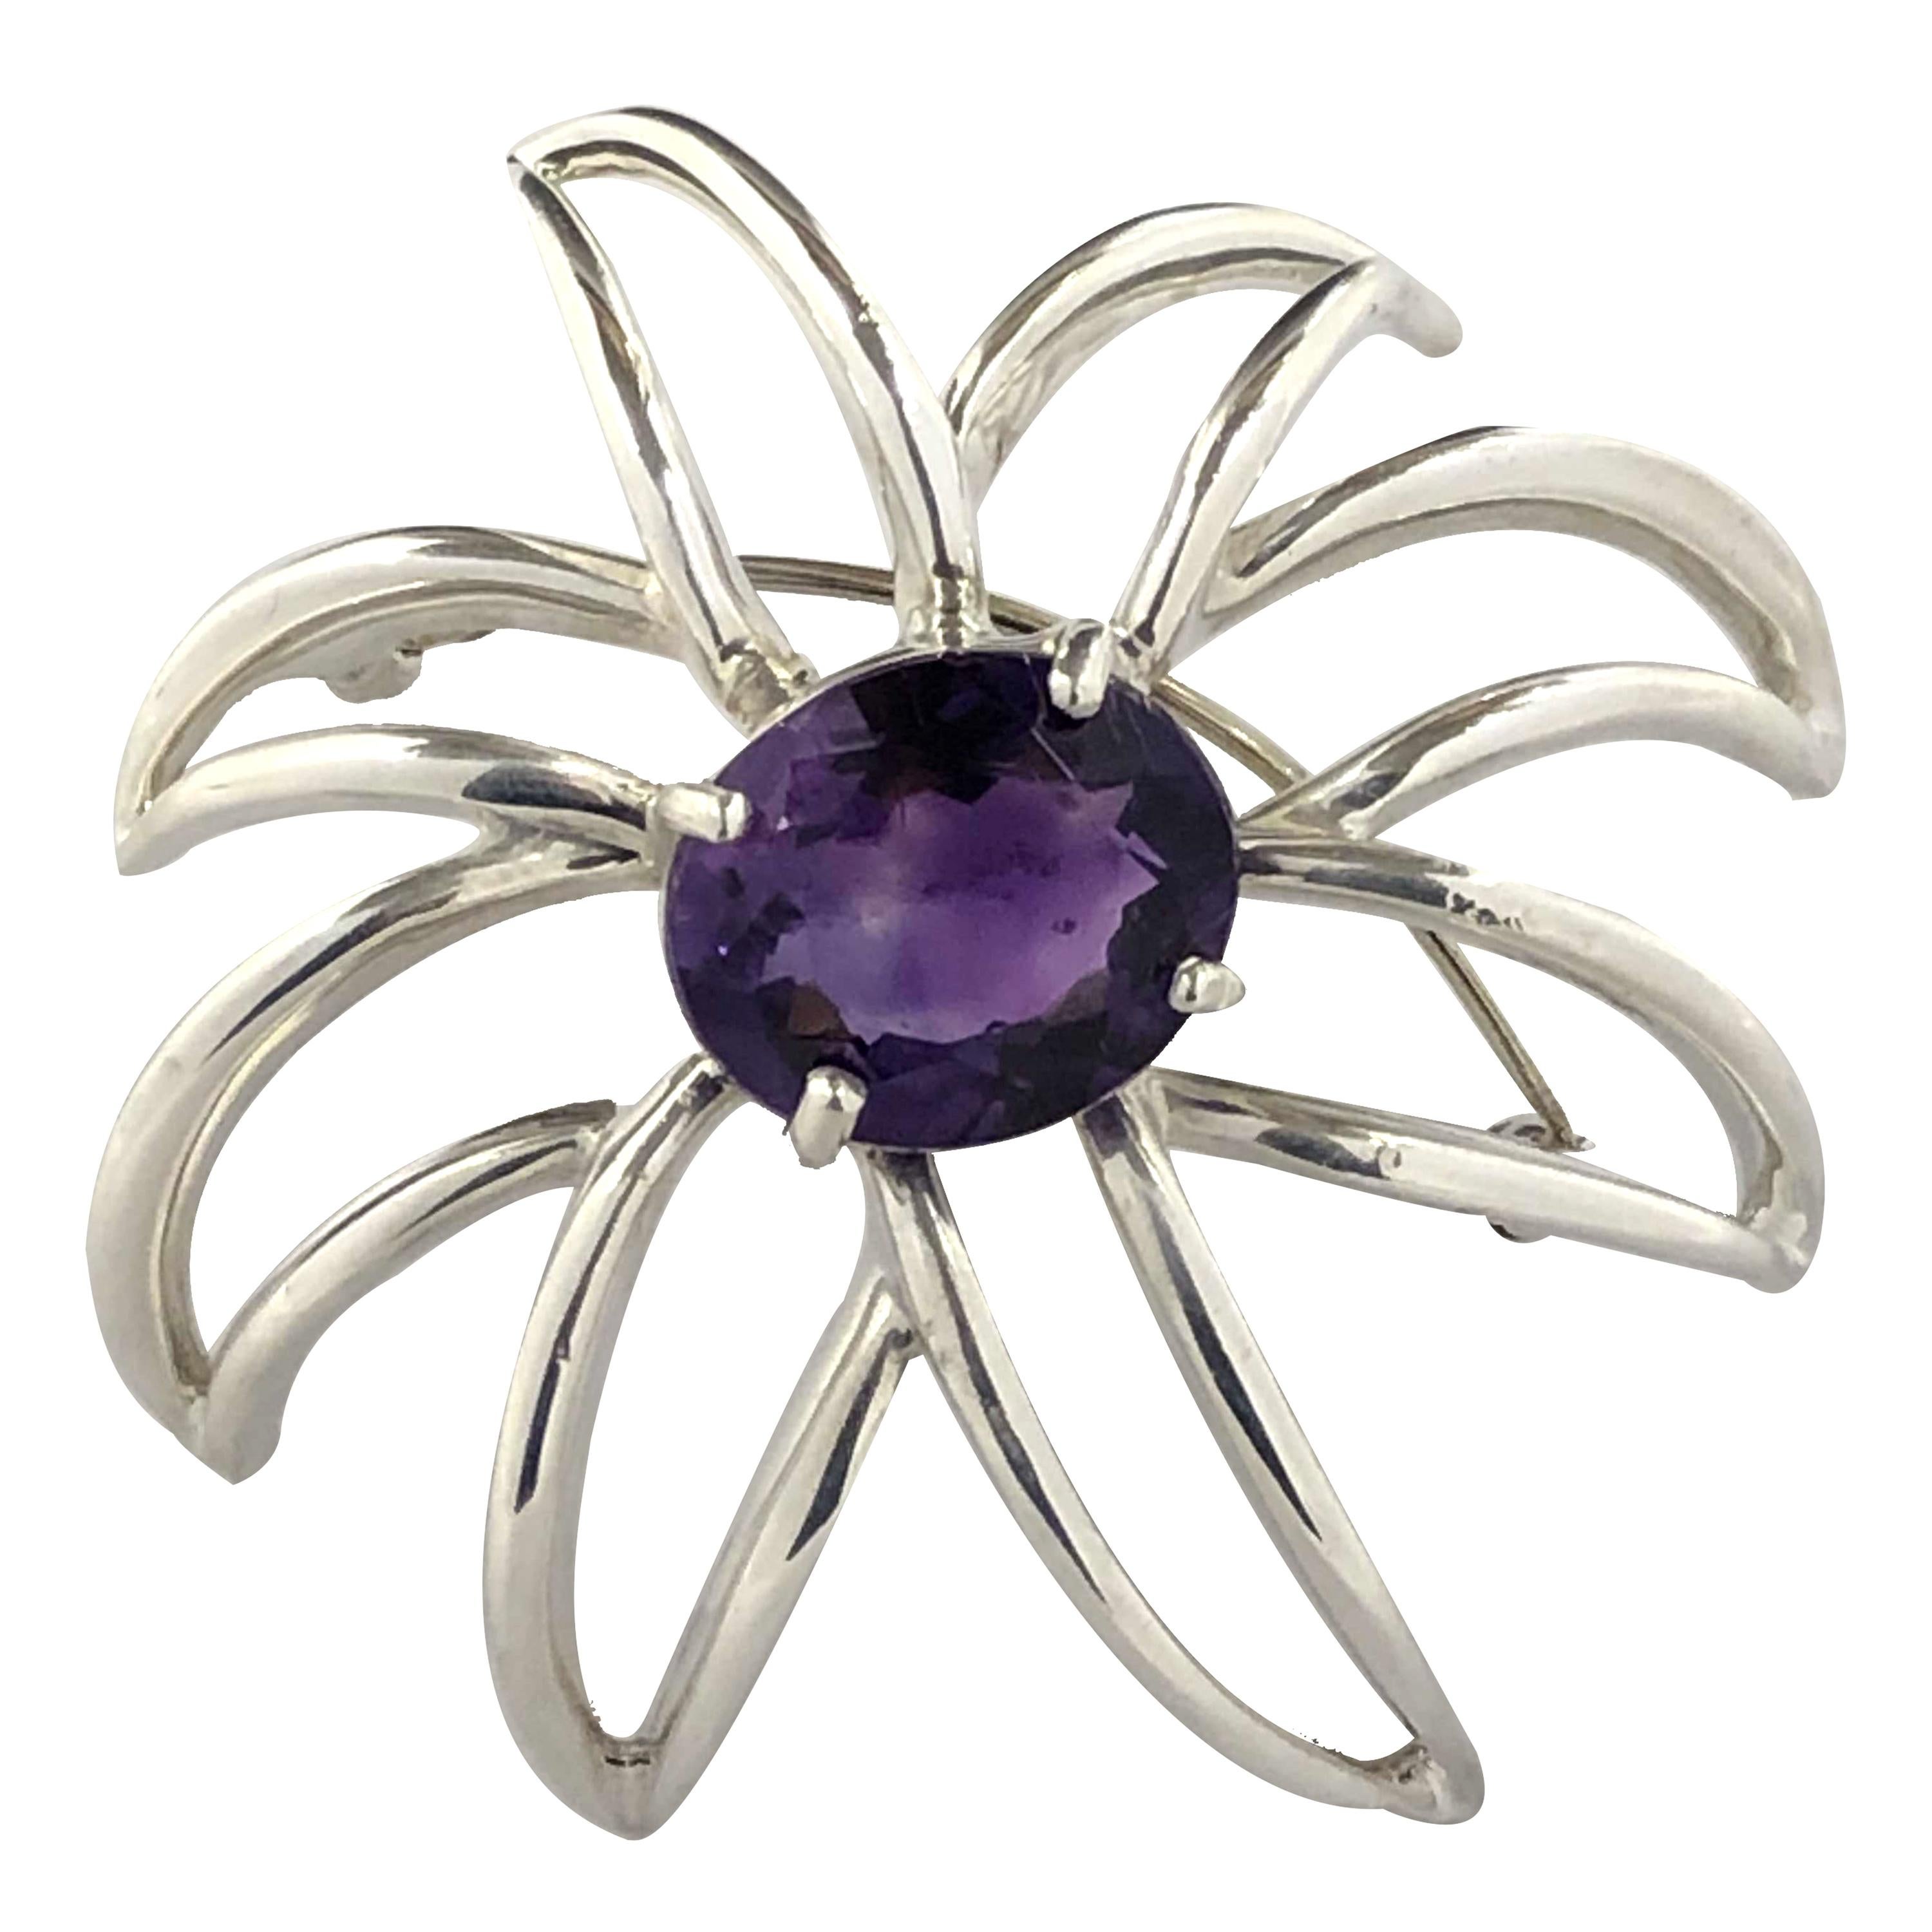 Tiffany & Co. Fireworks Sterling and Amethyst Large Brooch